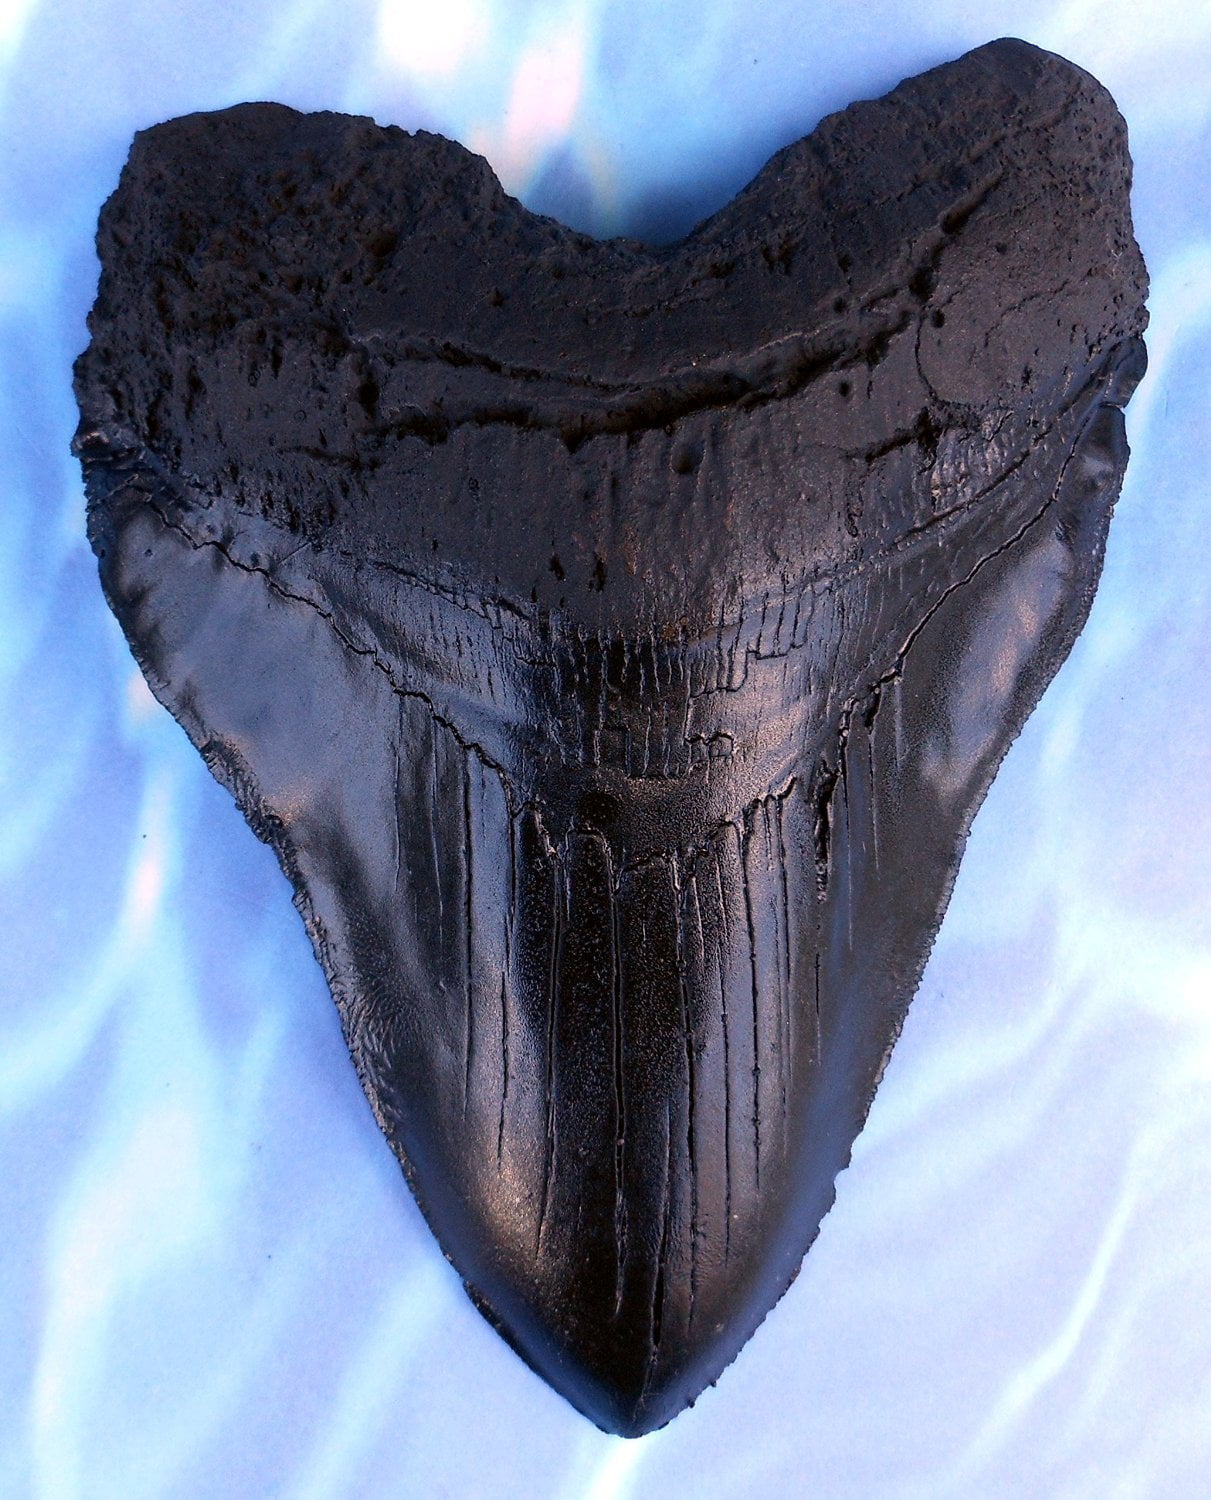 Replica Megalodon Tooth Metal Belt Buckle Giant Fossil Shark #431 4o